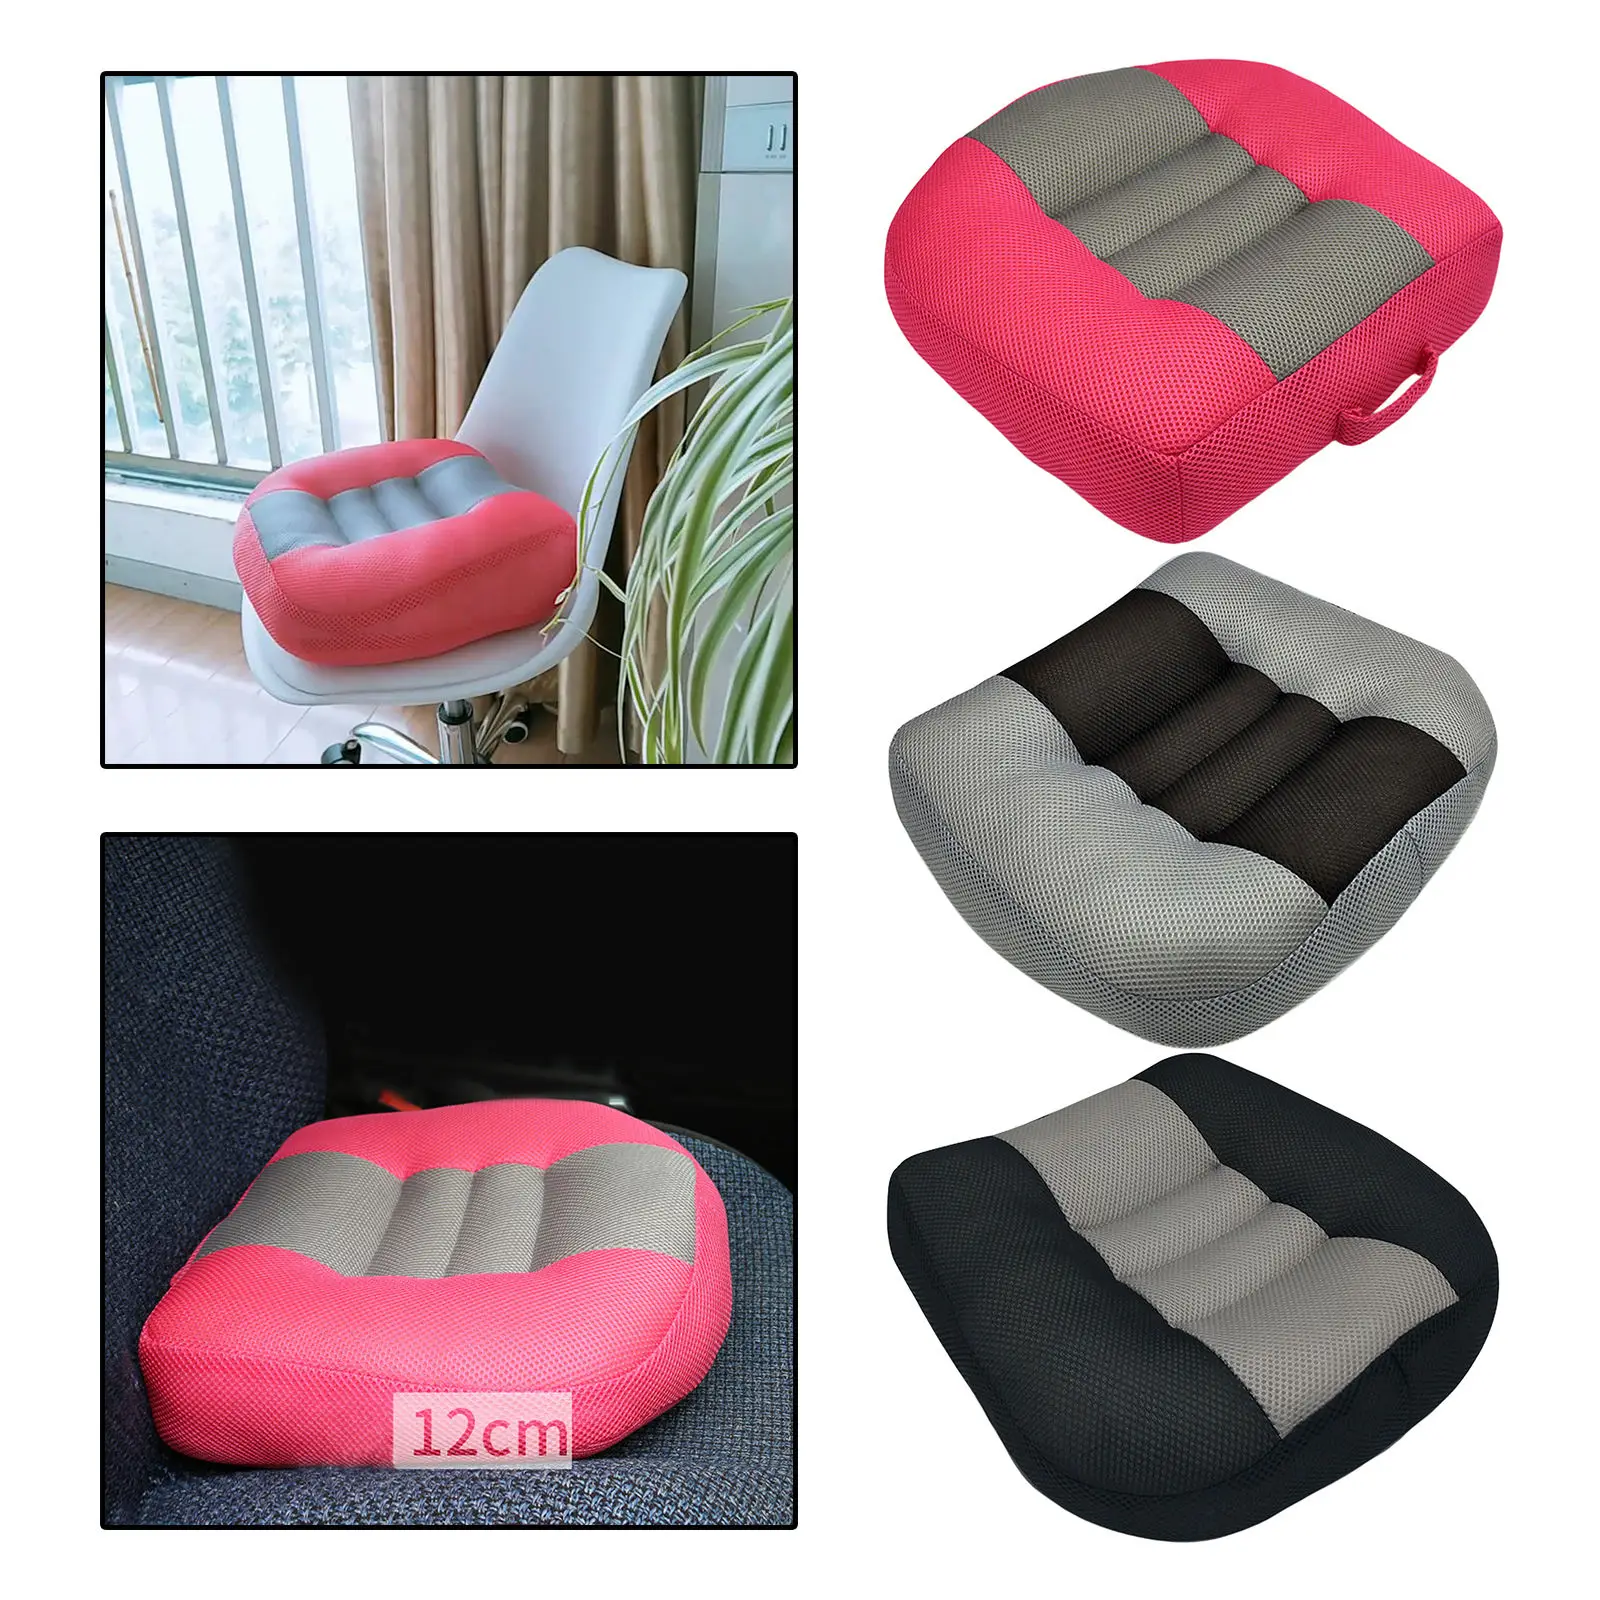 https://ae01.alicdn.com/kf/H031224fa8300482ea1e746b8675cba22n/Car-Booster-Seat-Cushion-Portable-Seat-Pad-Thickened-Non-slip-chair-pad-Height-Boost-Angle-Lift.jpg